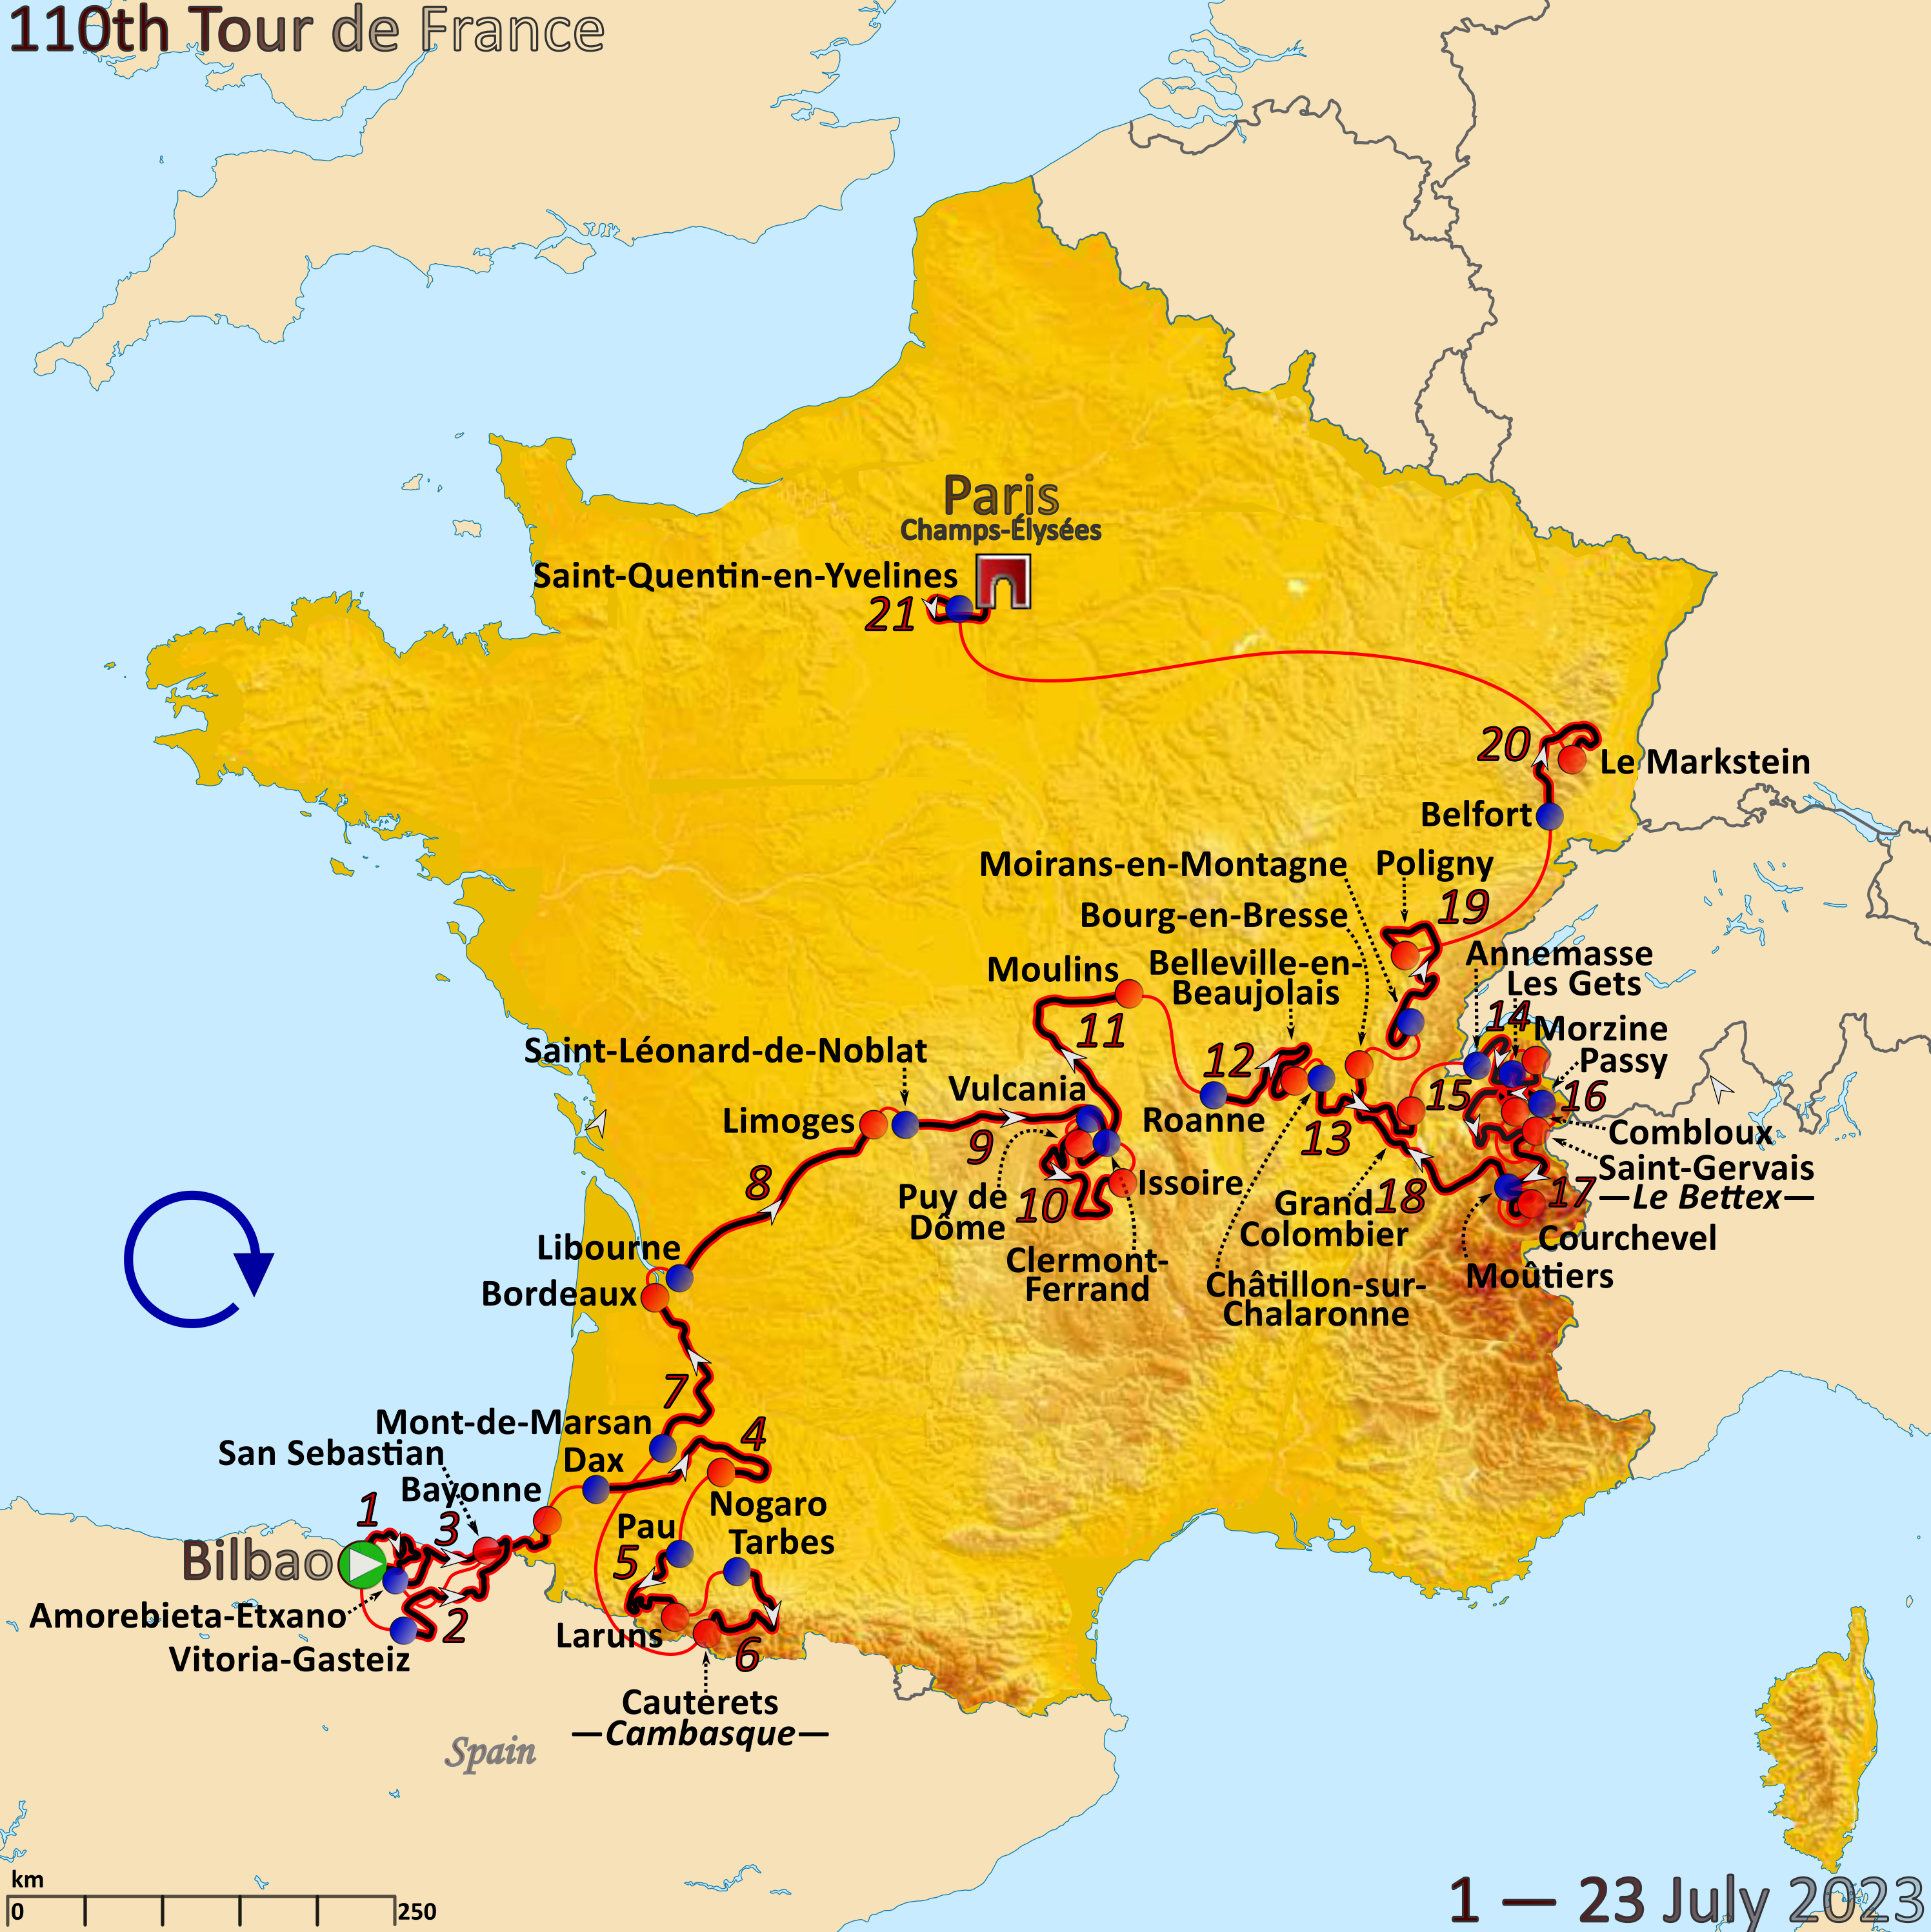 https://upload.wikimedia.org/wikipedia/commons/d/d1/Route_of_the_2023_Tour_de_France.png